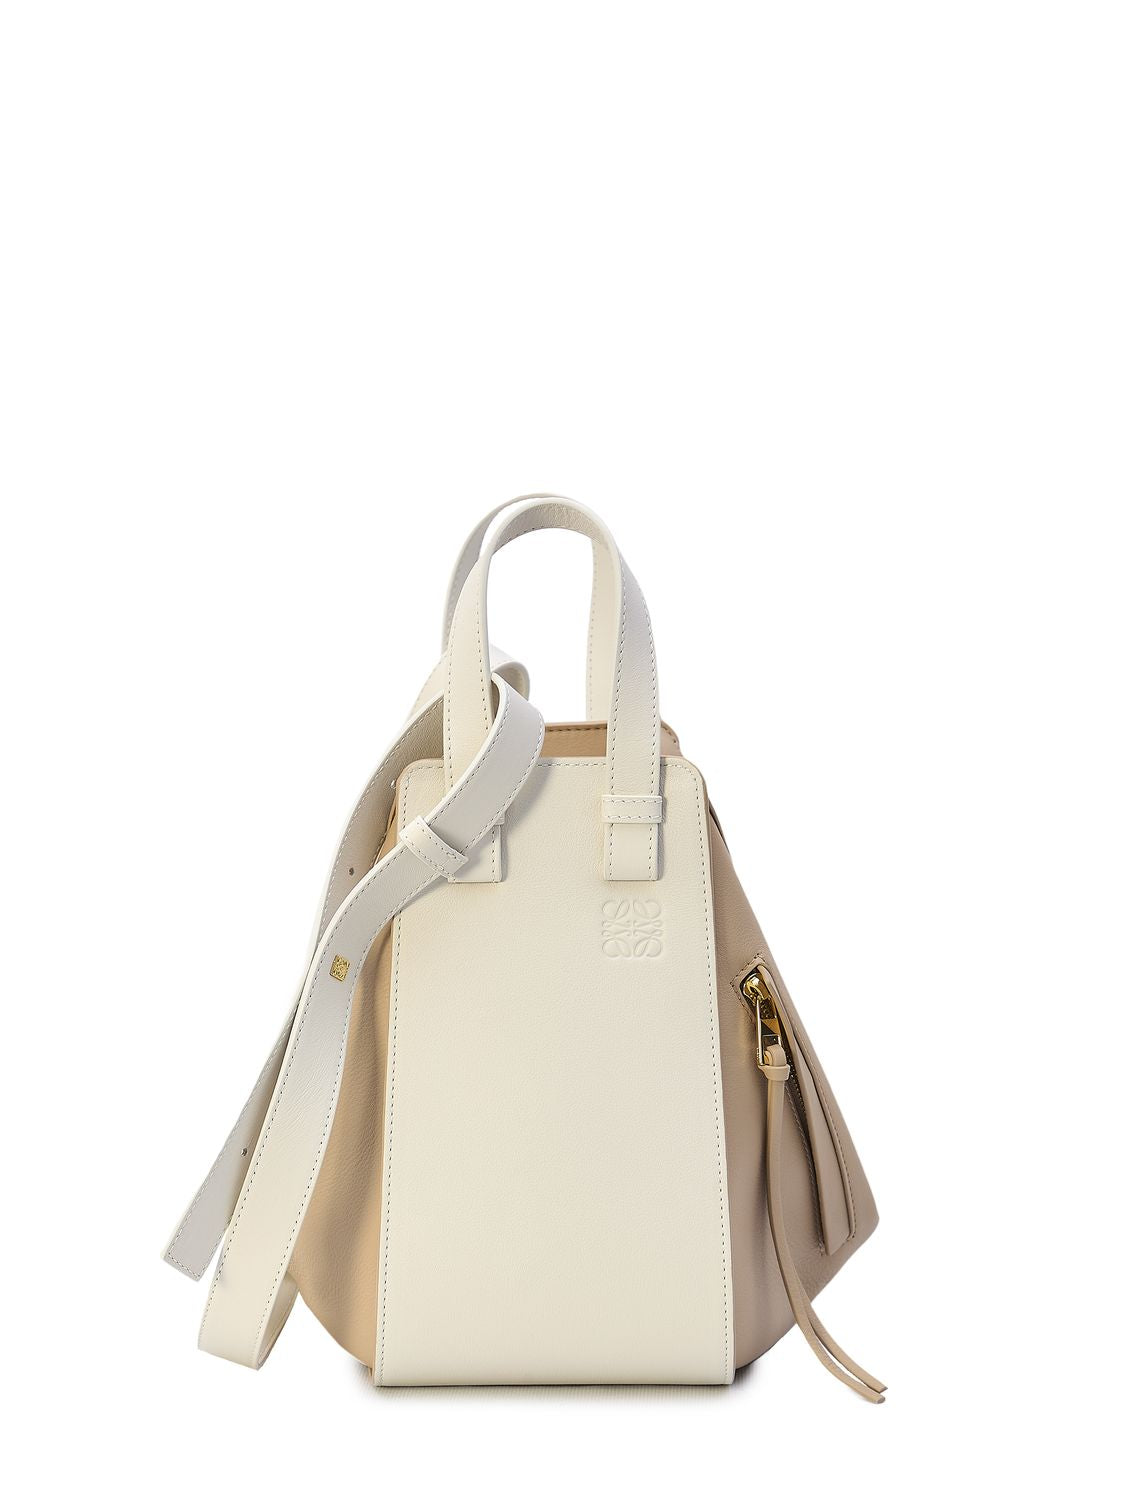 LOEWE Chic White and Beige Mini Hammock Calfskin Handbag with Embossed Detail, Adjustable Strap, and Multiple Pockets - 25x13.5x30 cm